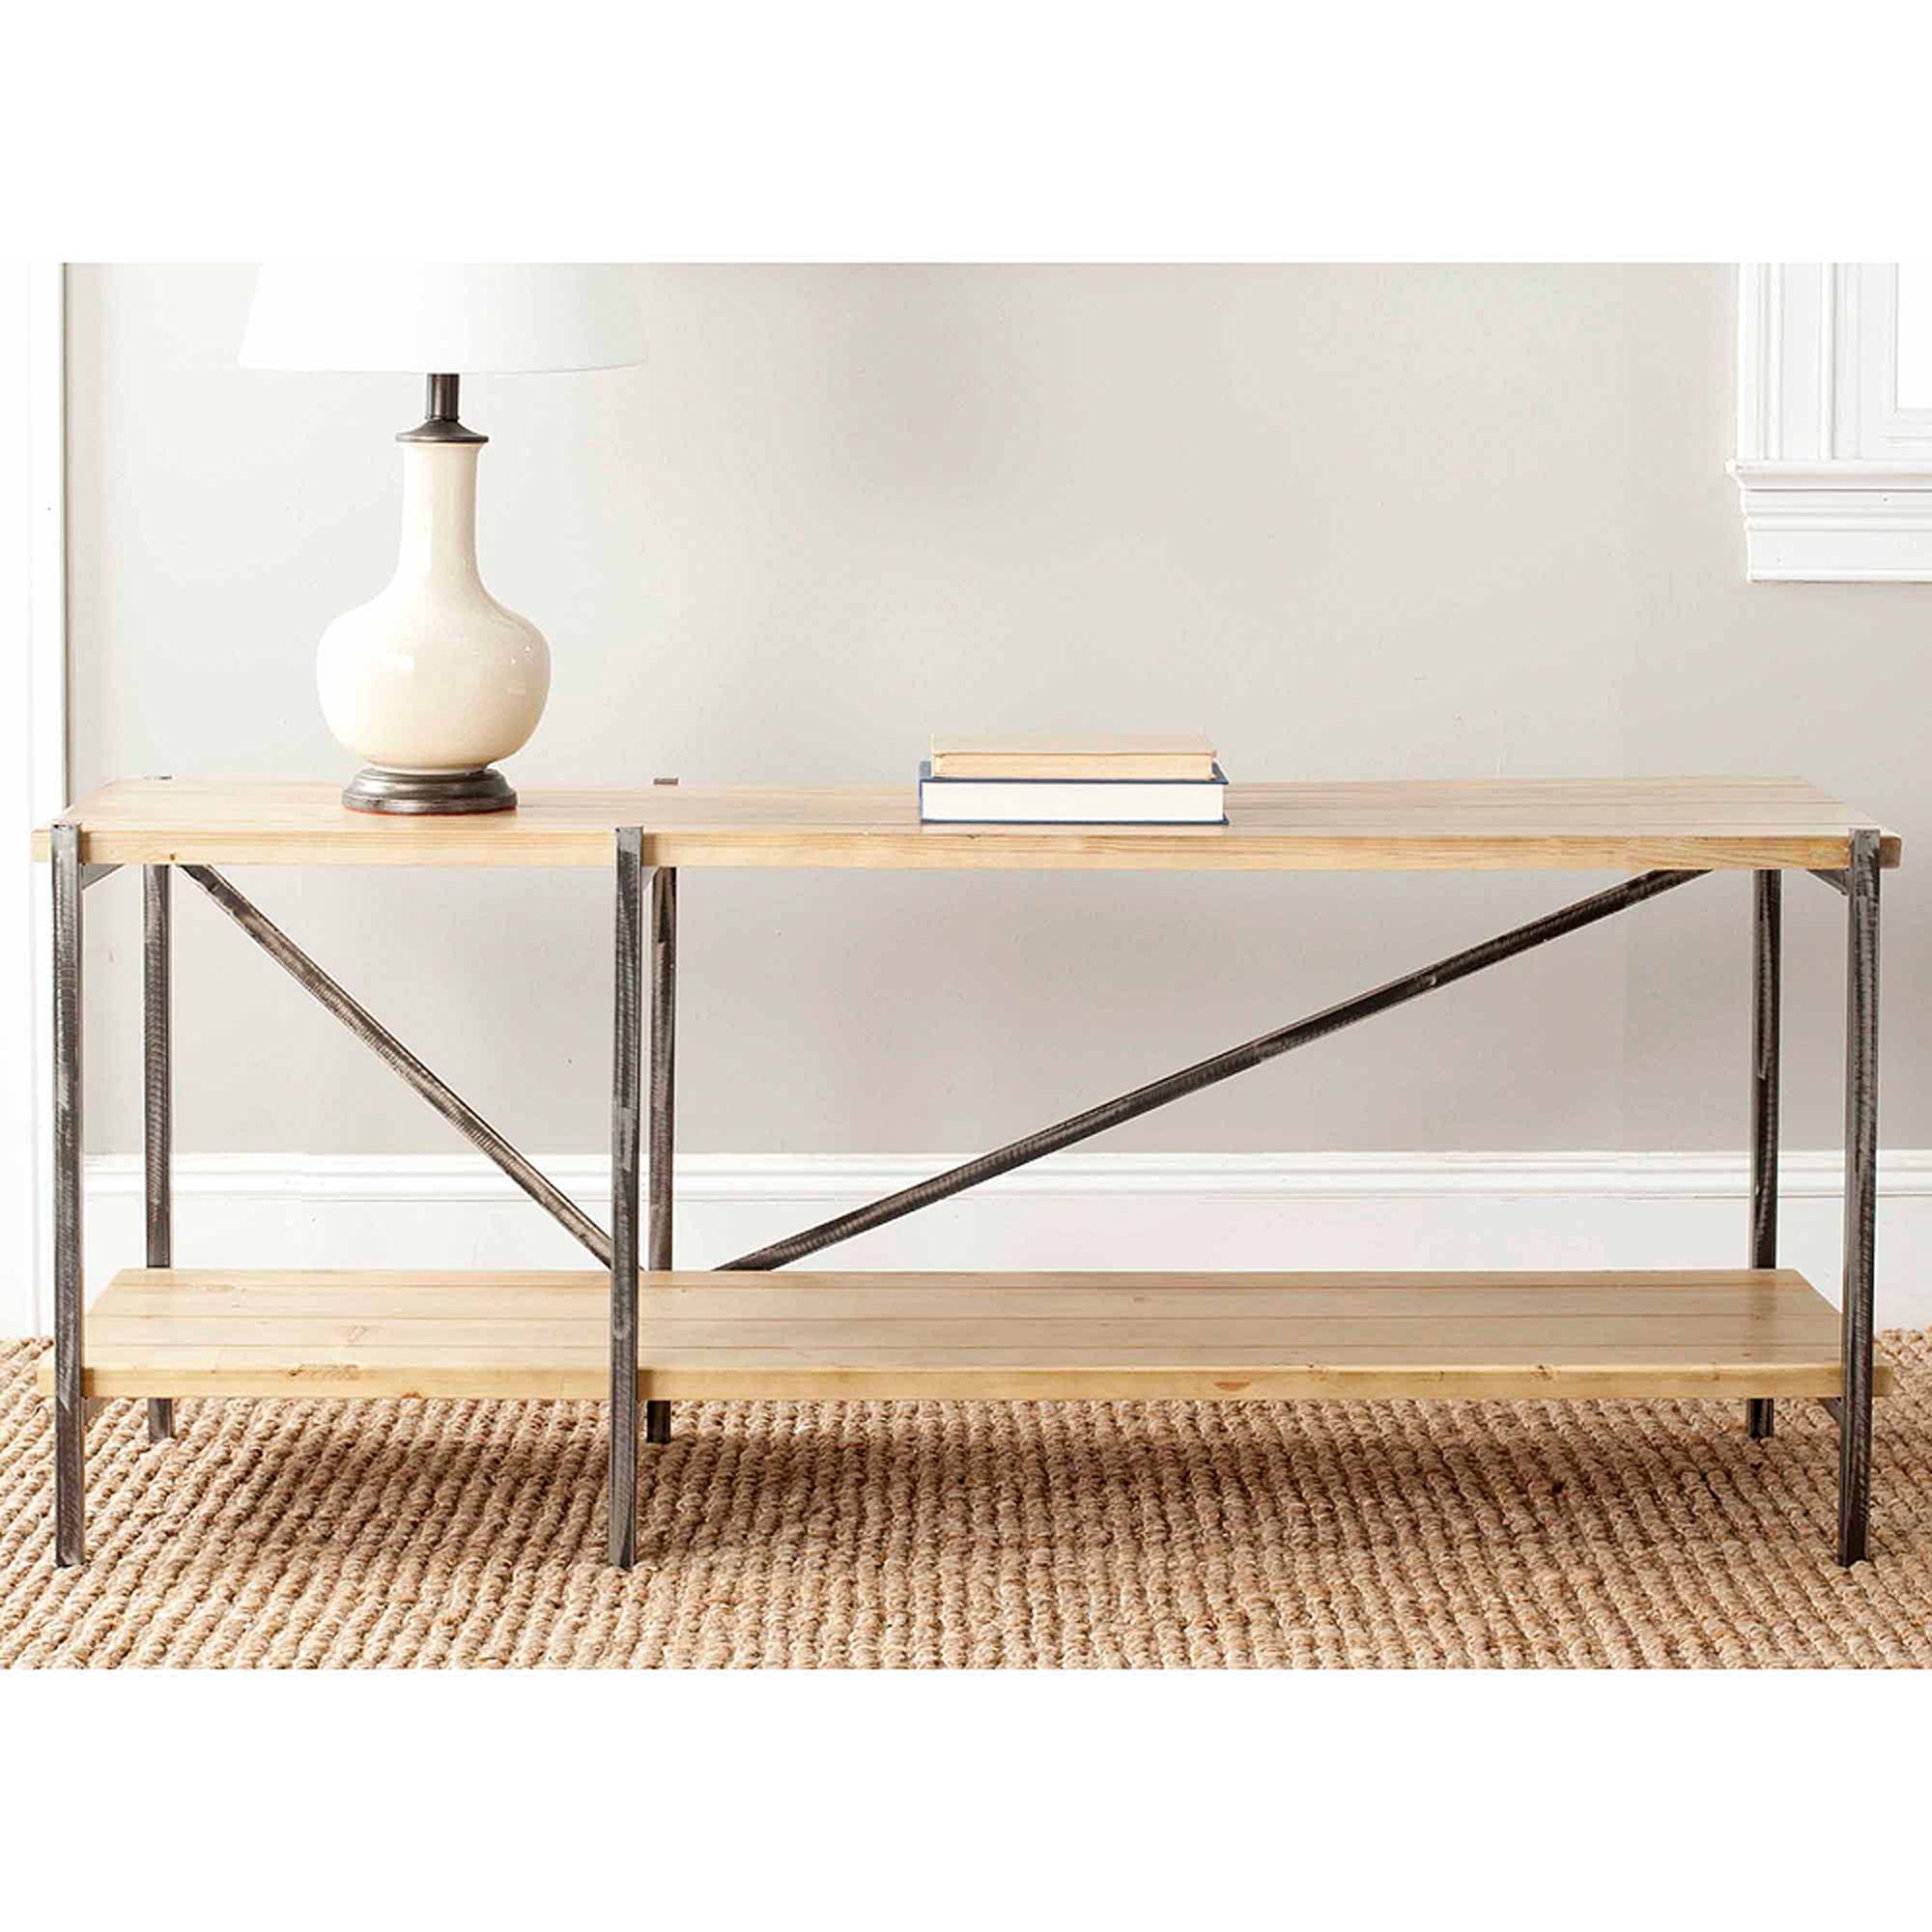 Safavieh Theodore Fir Wood Console, Natural Color Intended For Natural Wood Console Tables (Photo 12 of 20)